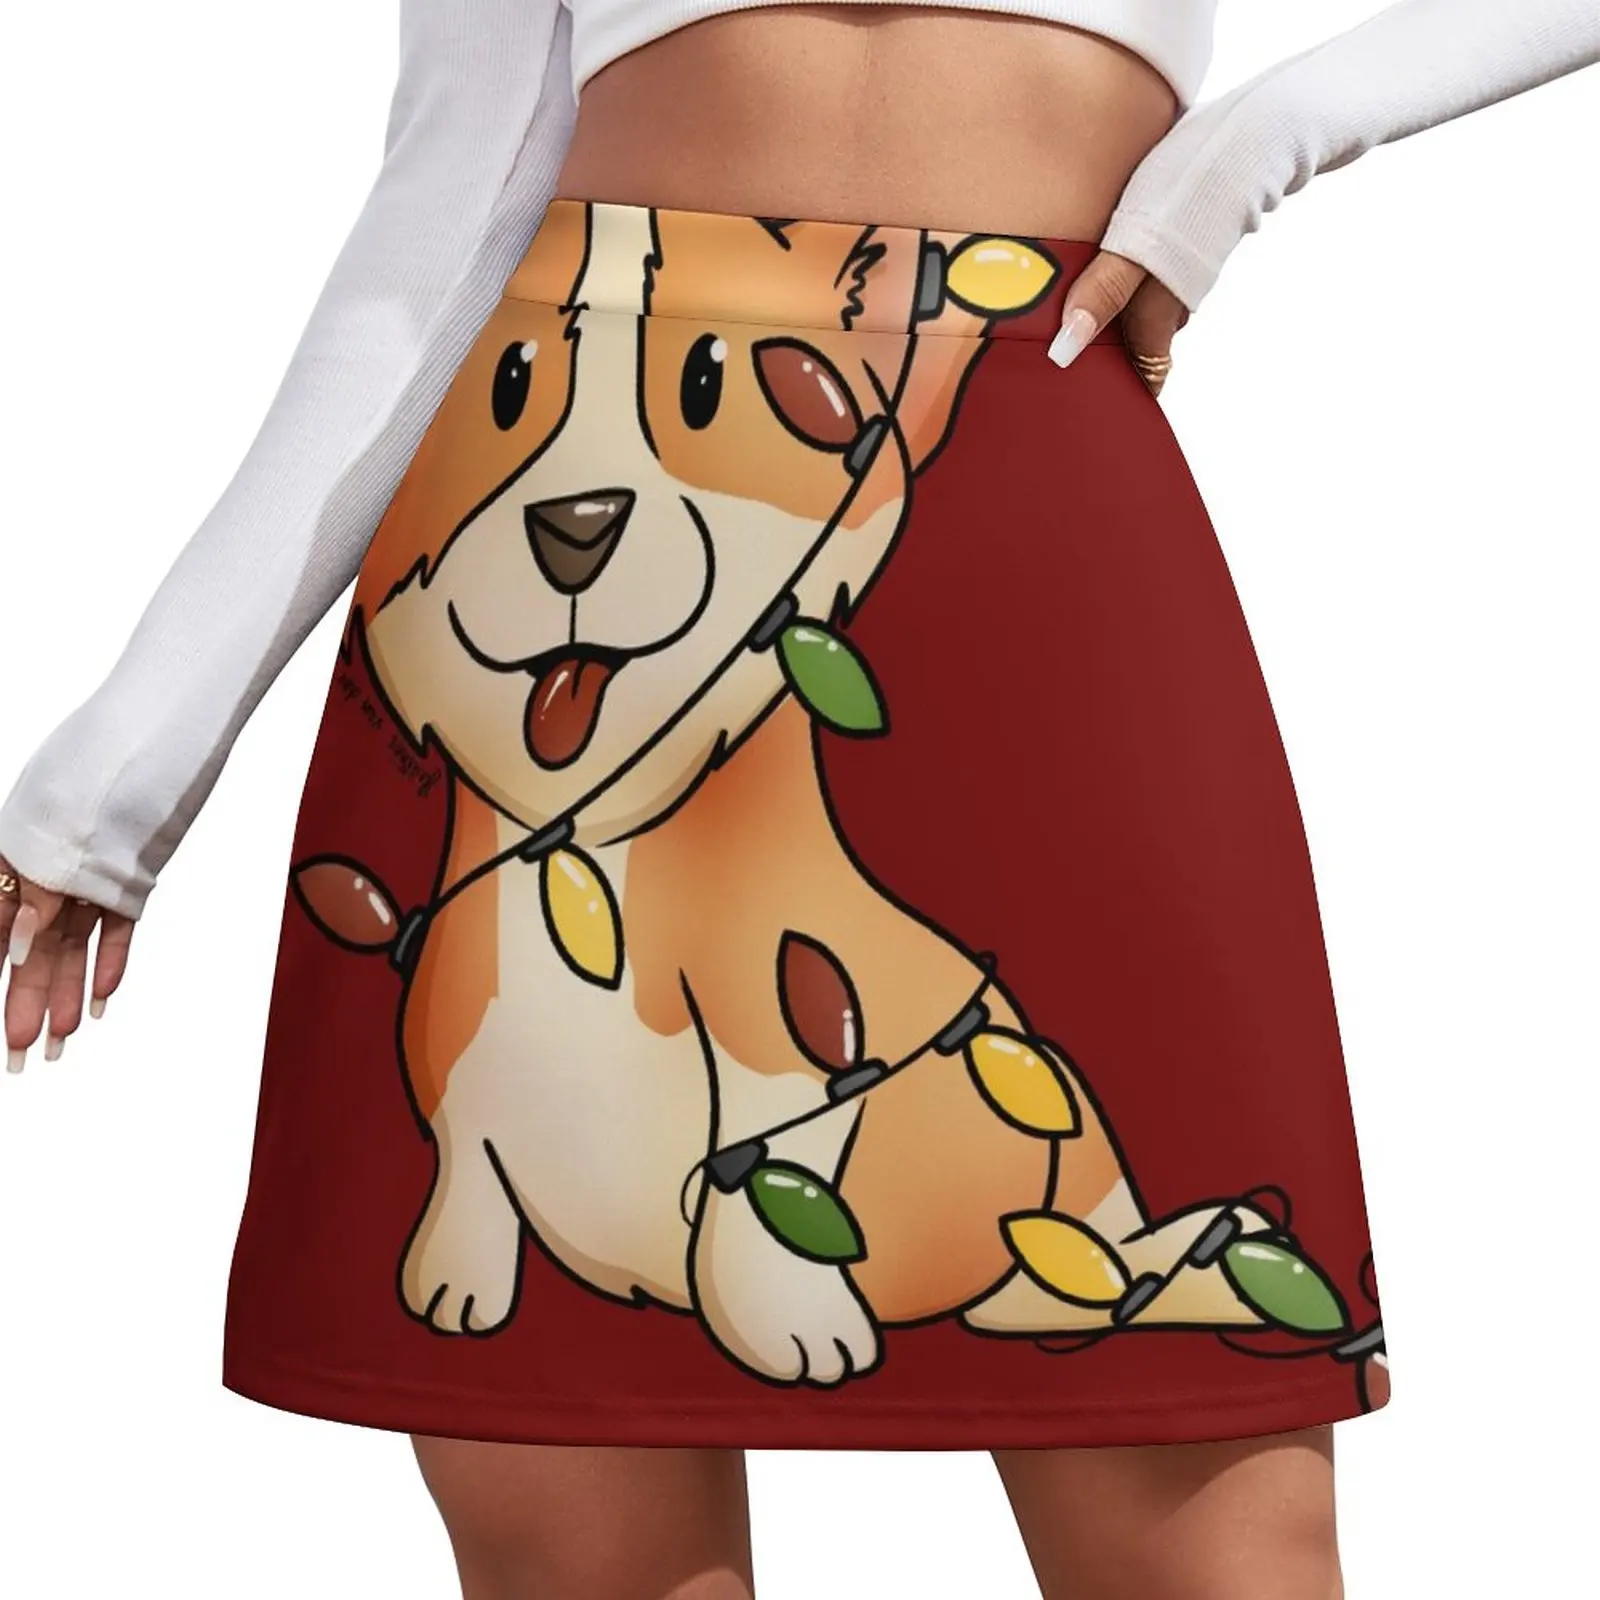 Our Little Cute Corgi Tangled in Christmas Lights On a Cheery Red Mini Skirt womens skirts Women clothing 10 led string lights christmas led string lights xmas decor